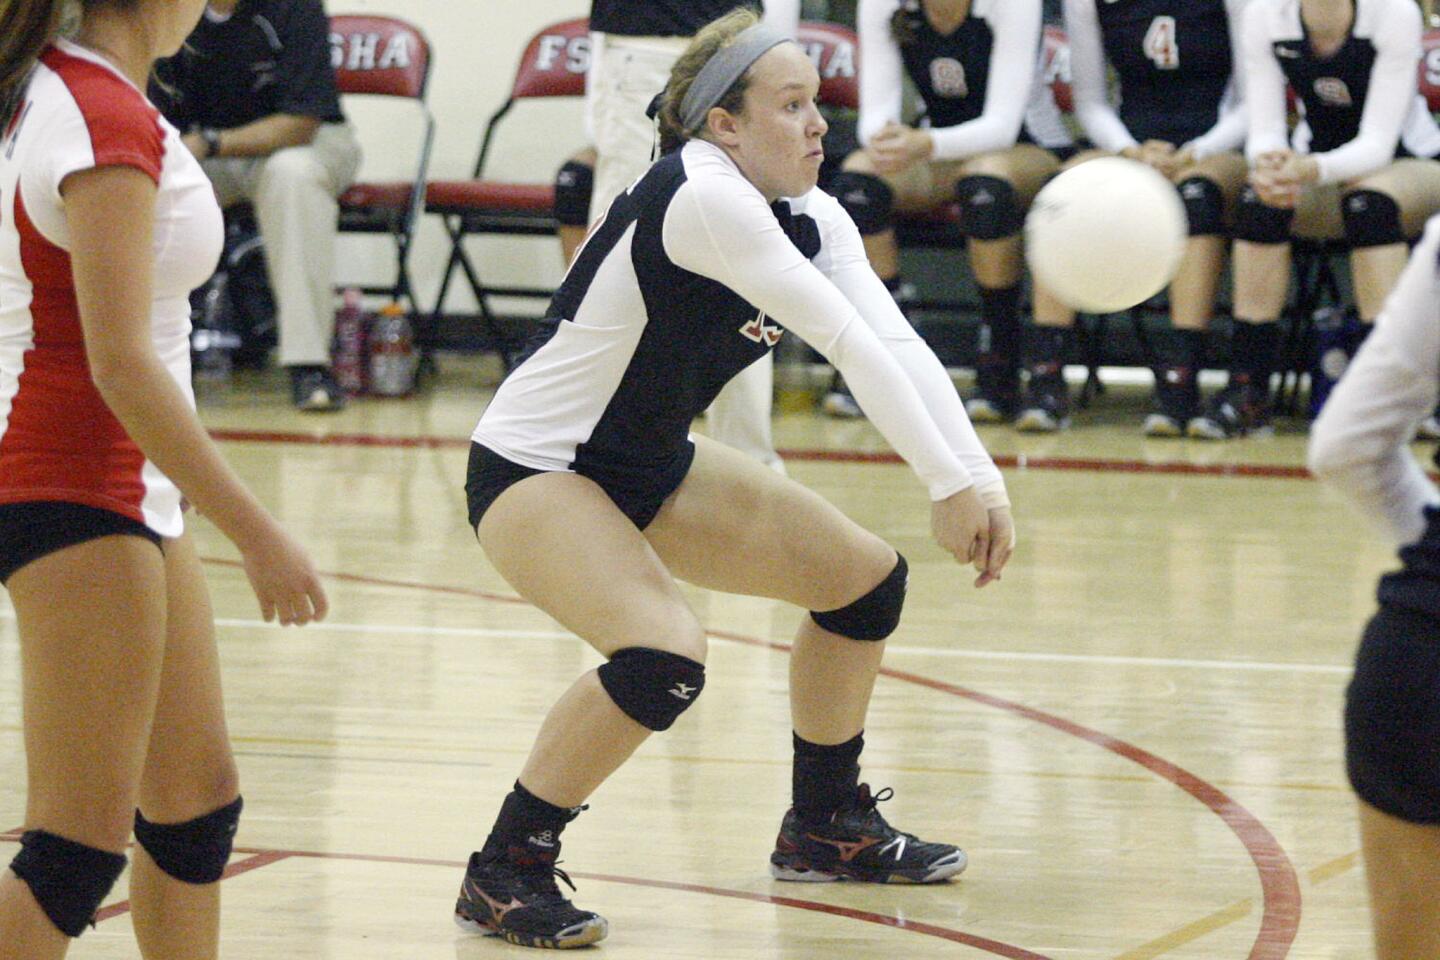 FSHA's Dana Carney hits the ball during a match against Harvard-Westlake at FSHA in La Canada l on Tuesday, October 2, 2012.